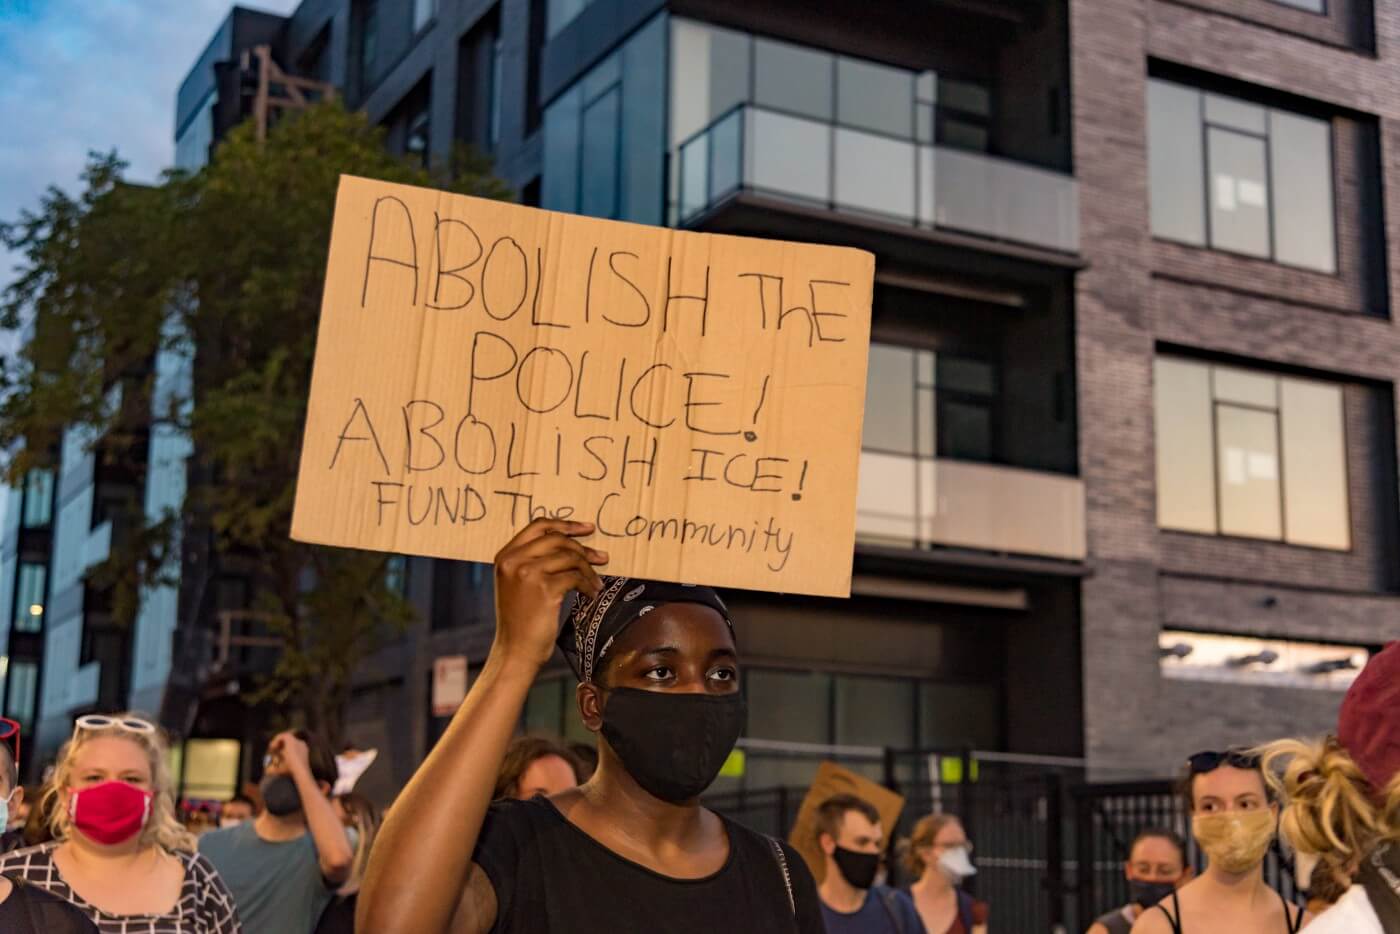 people marching and a black protestor holding cardboard sign that says Abolish the Police, Abolish ICE